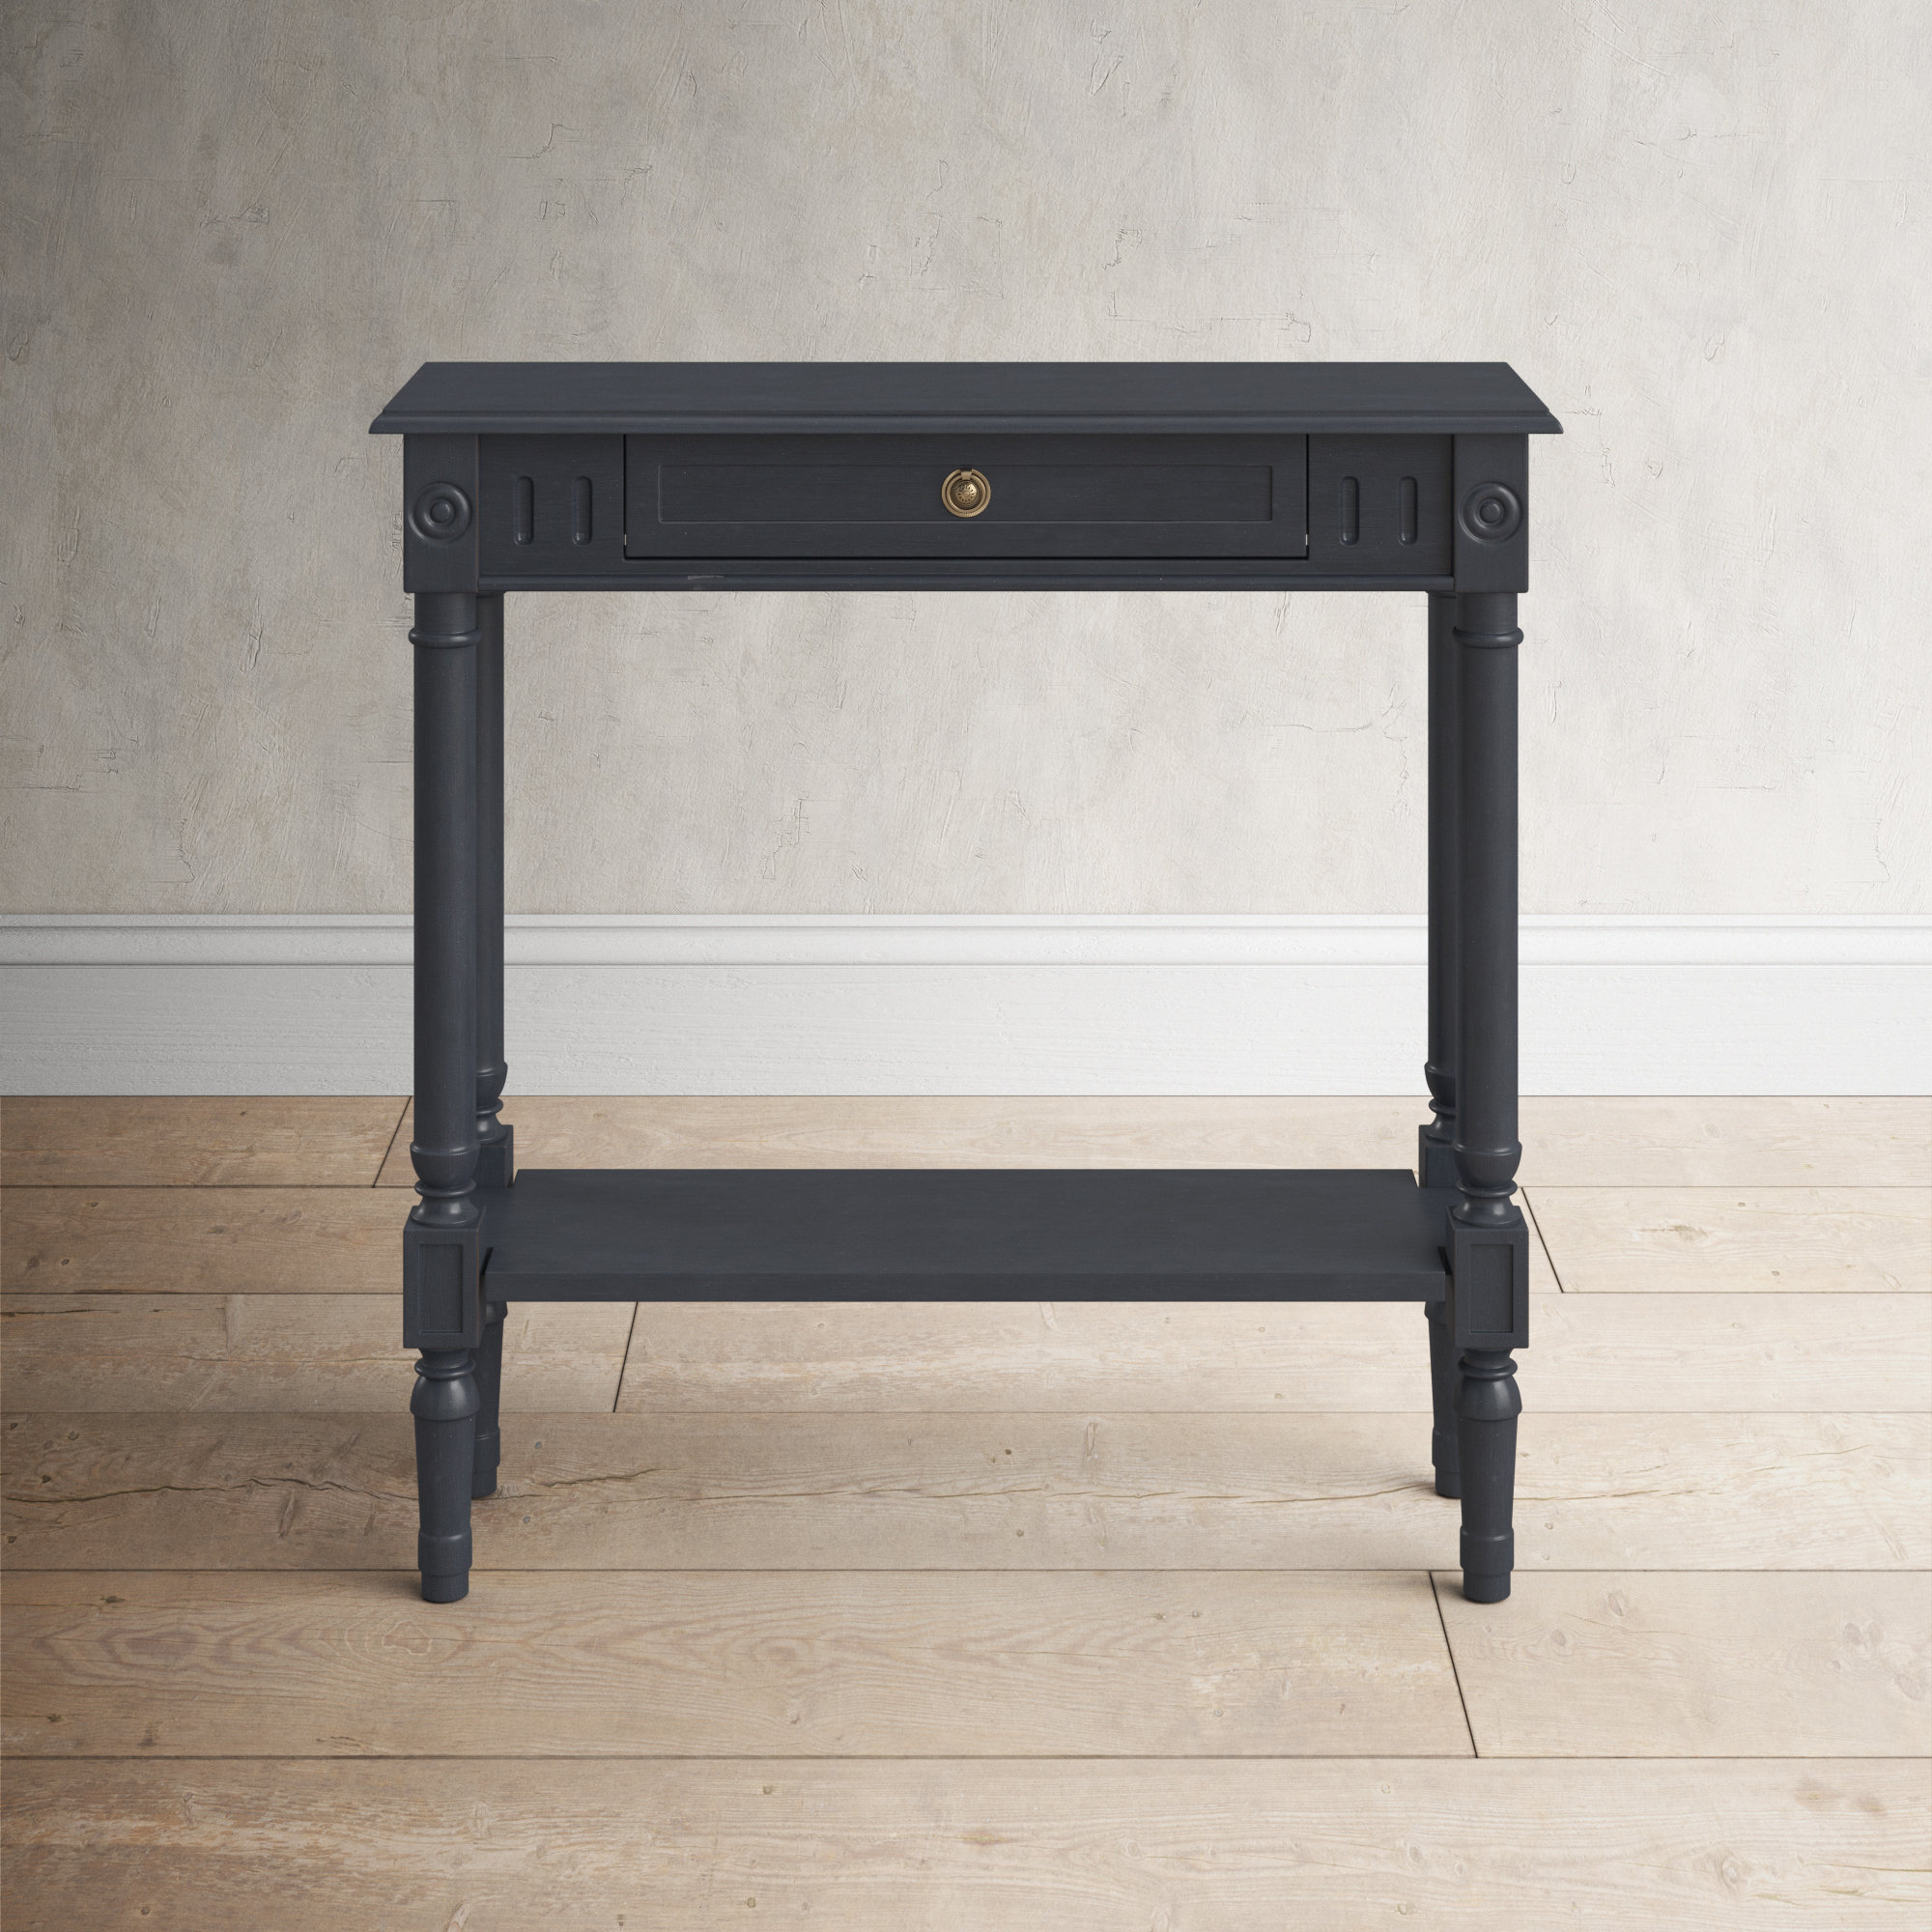 Denim Blue chalkboard kitchen table top with bright white legs